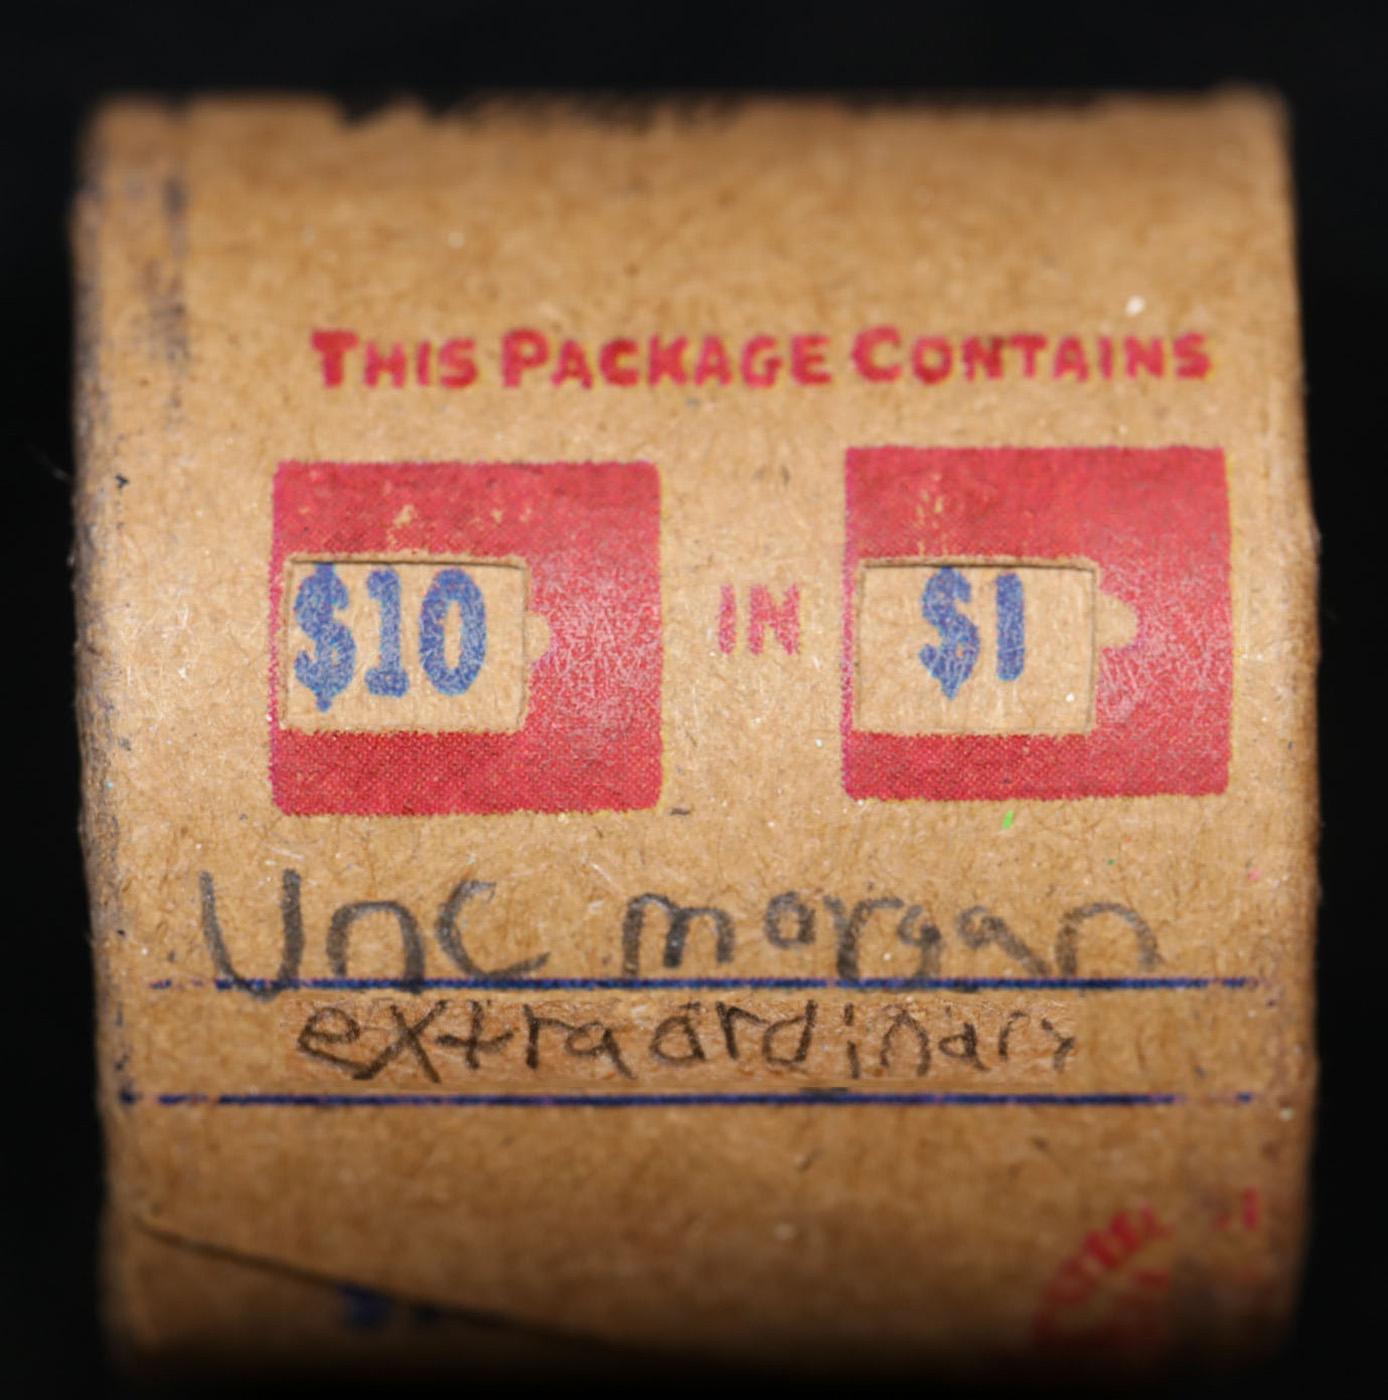 *EXCLUSIVE* x10 Morgan Covered End Roll! Marked "Unc Morgan Extraordinary"! - Huge Vault Hoard  (FC)